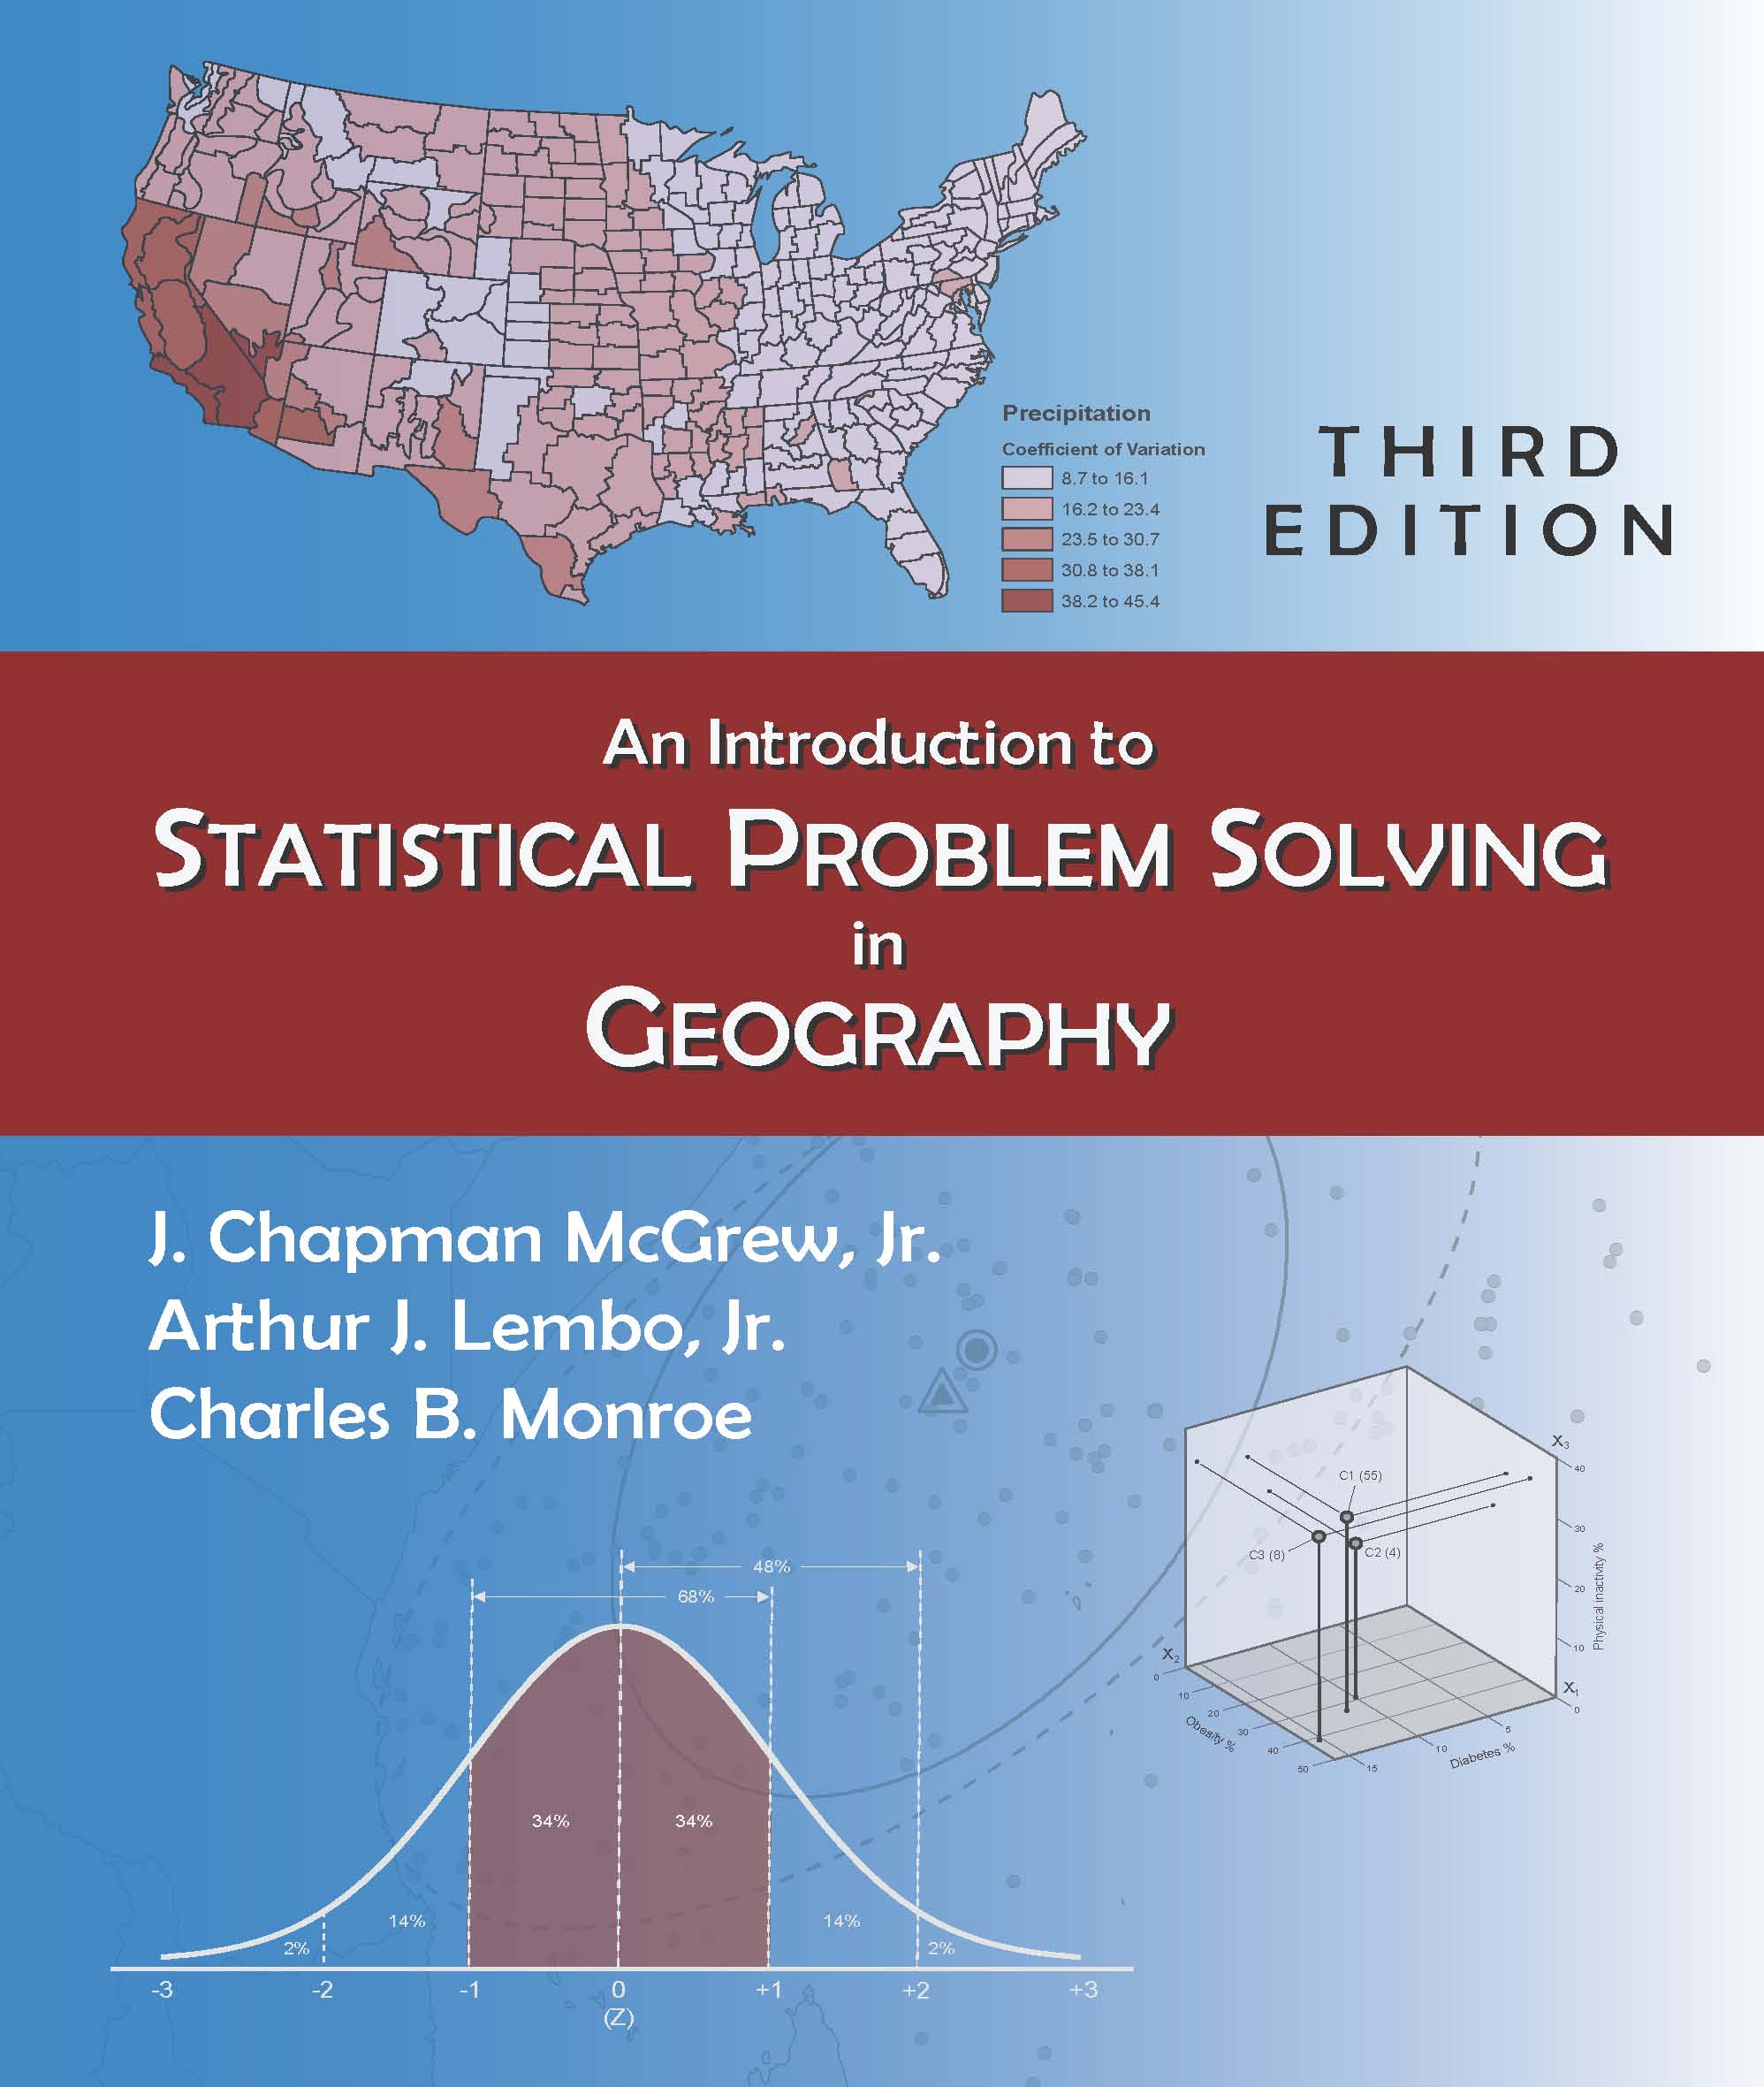 An Introduction to Statistical Problem Solving in Geography: Third Edition by J. Chapman McGrew, Jr., Arthur J. Lembo, Jr., Charles B. Monroe